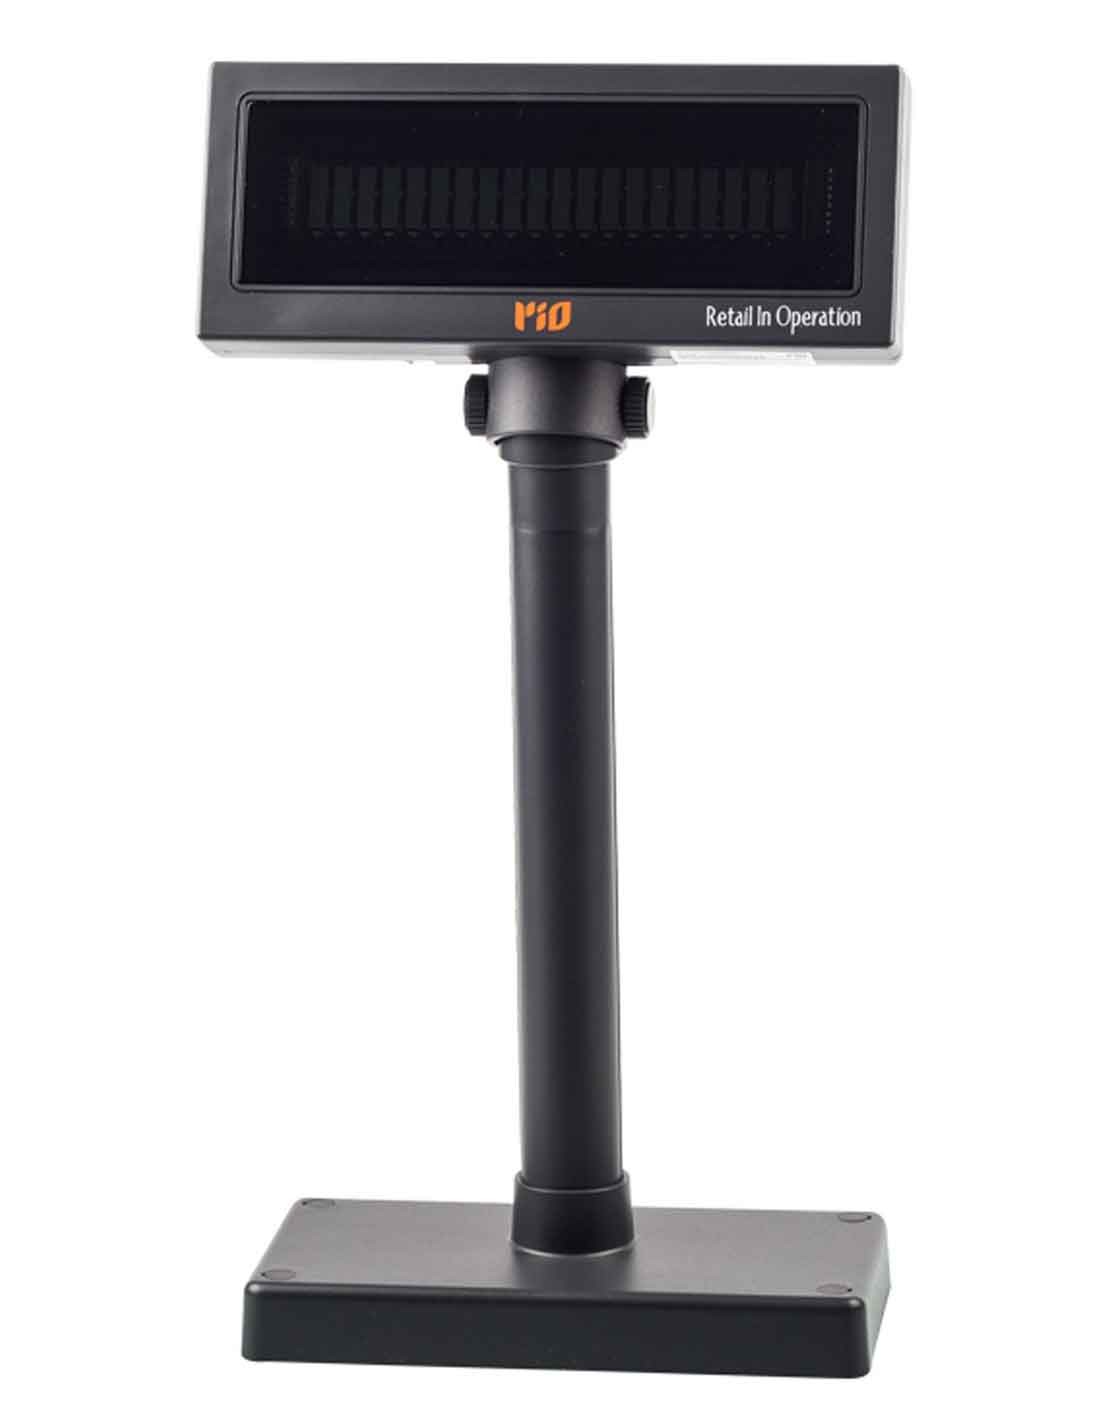 RIO RPD-200 Customer Pole (VFD) Display at an Affordable Price in Dubai Online Shop for POS System